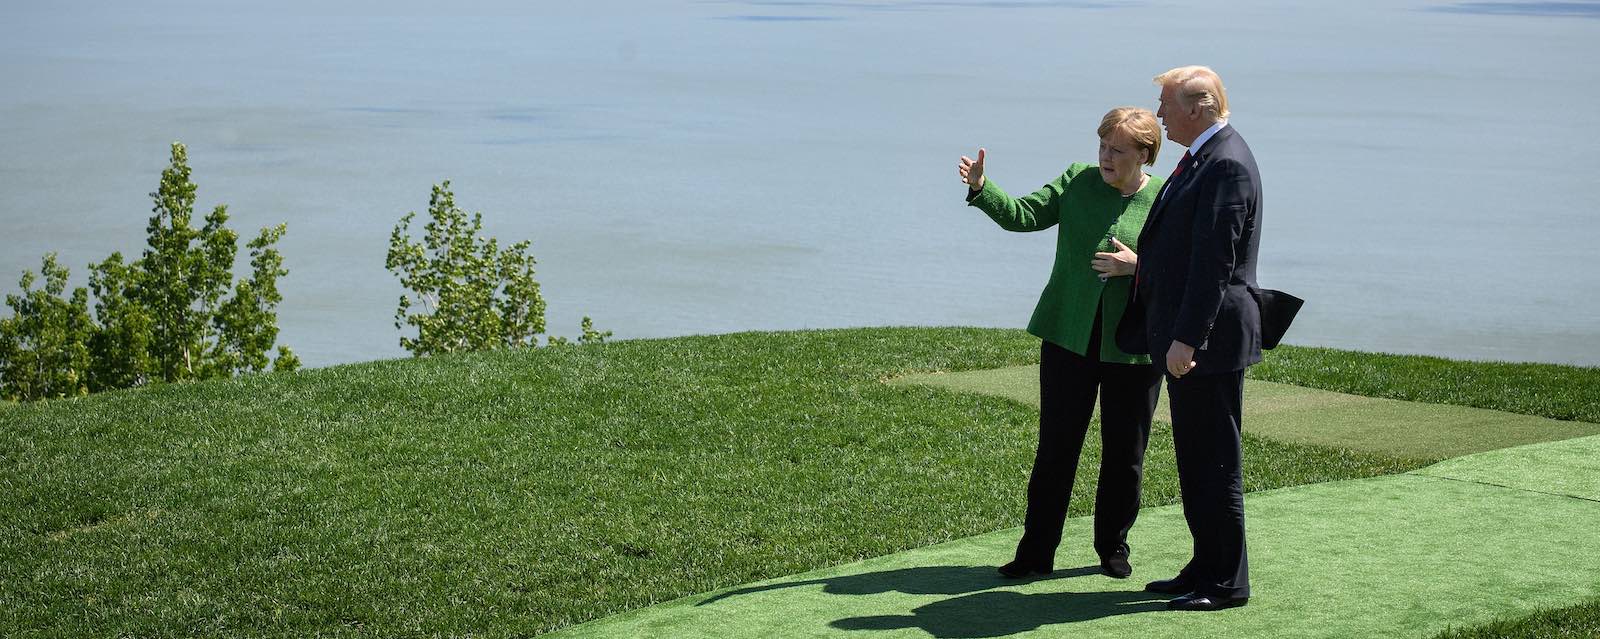 German Chancellor Angela Merkel and US President Donald Trump speak at the G7 Summit in Canada, (Photo: Leon Neal/Getty)